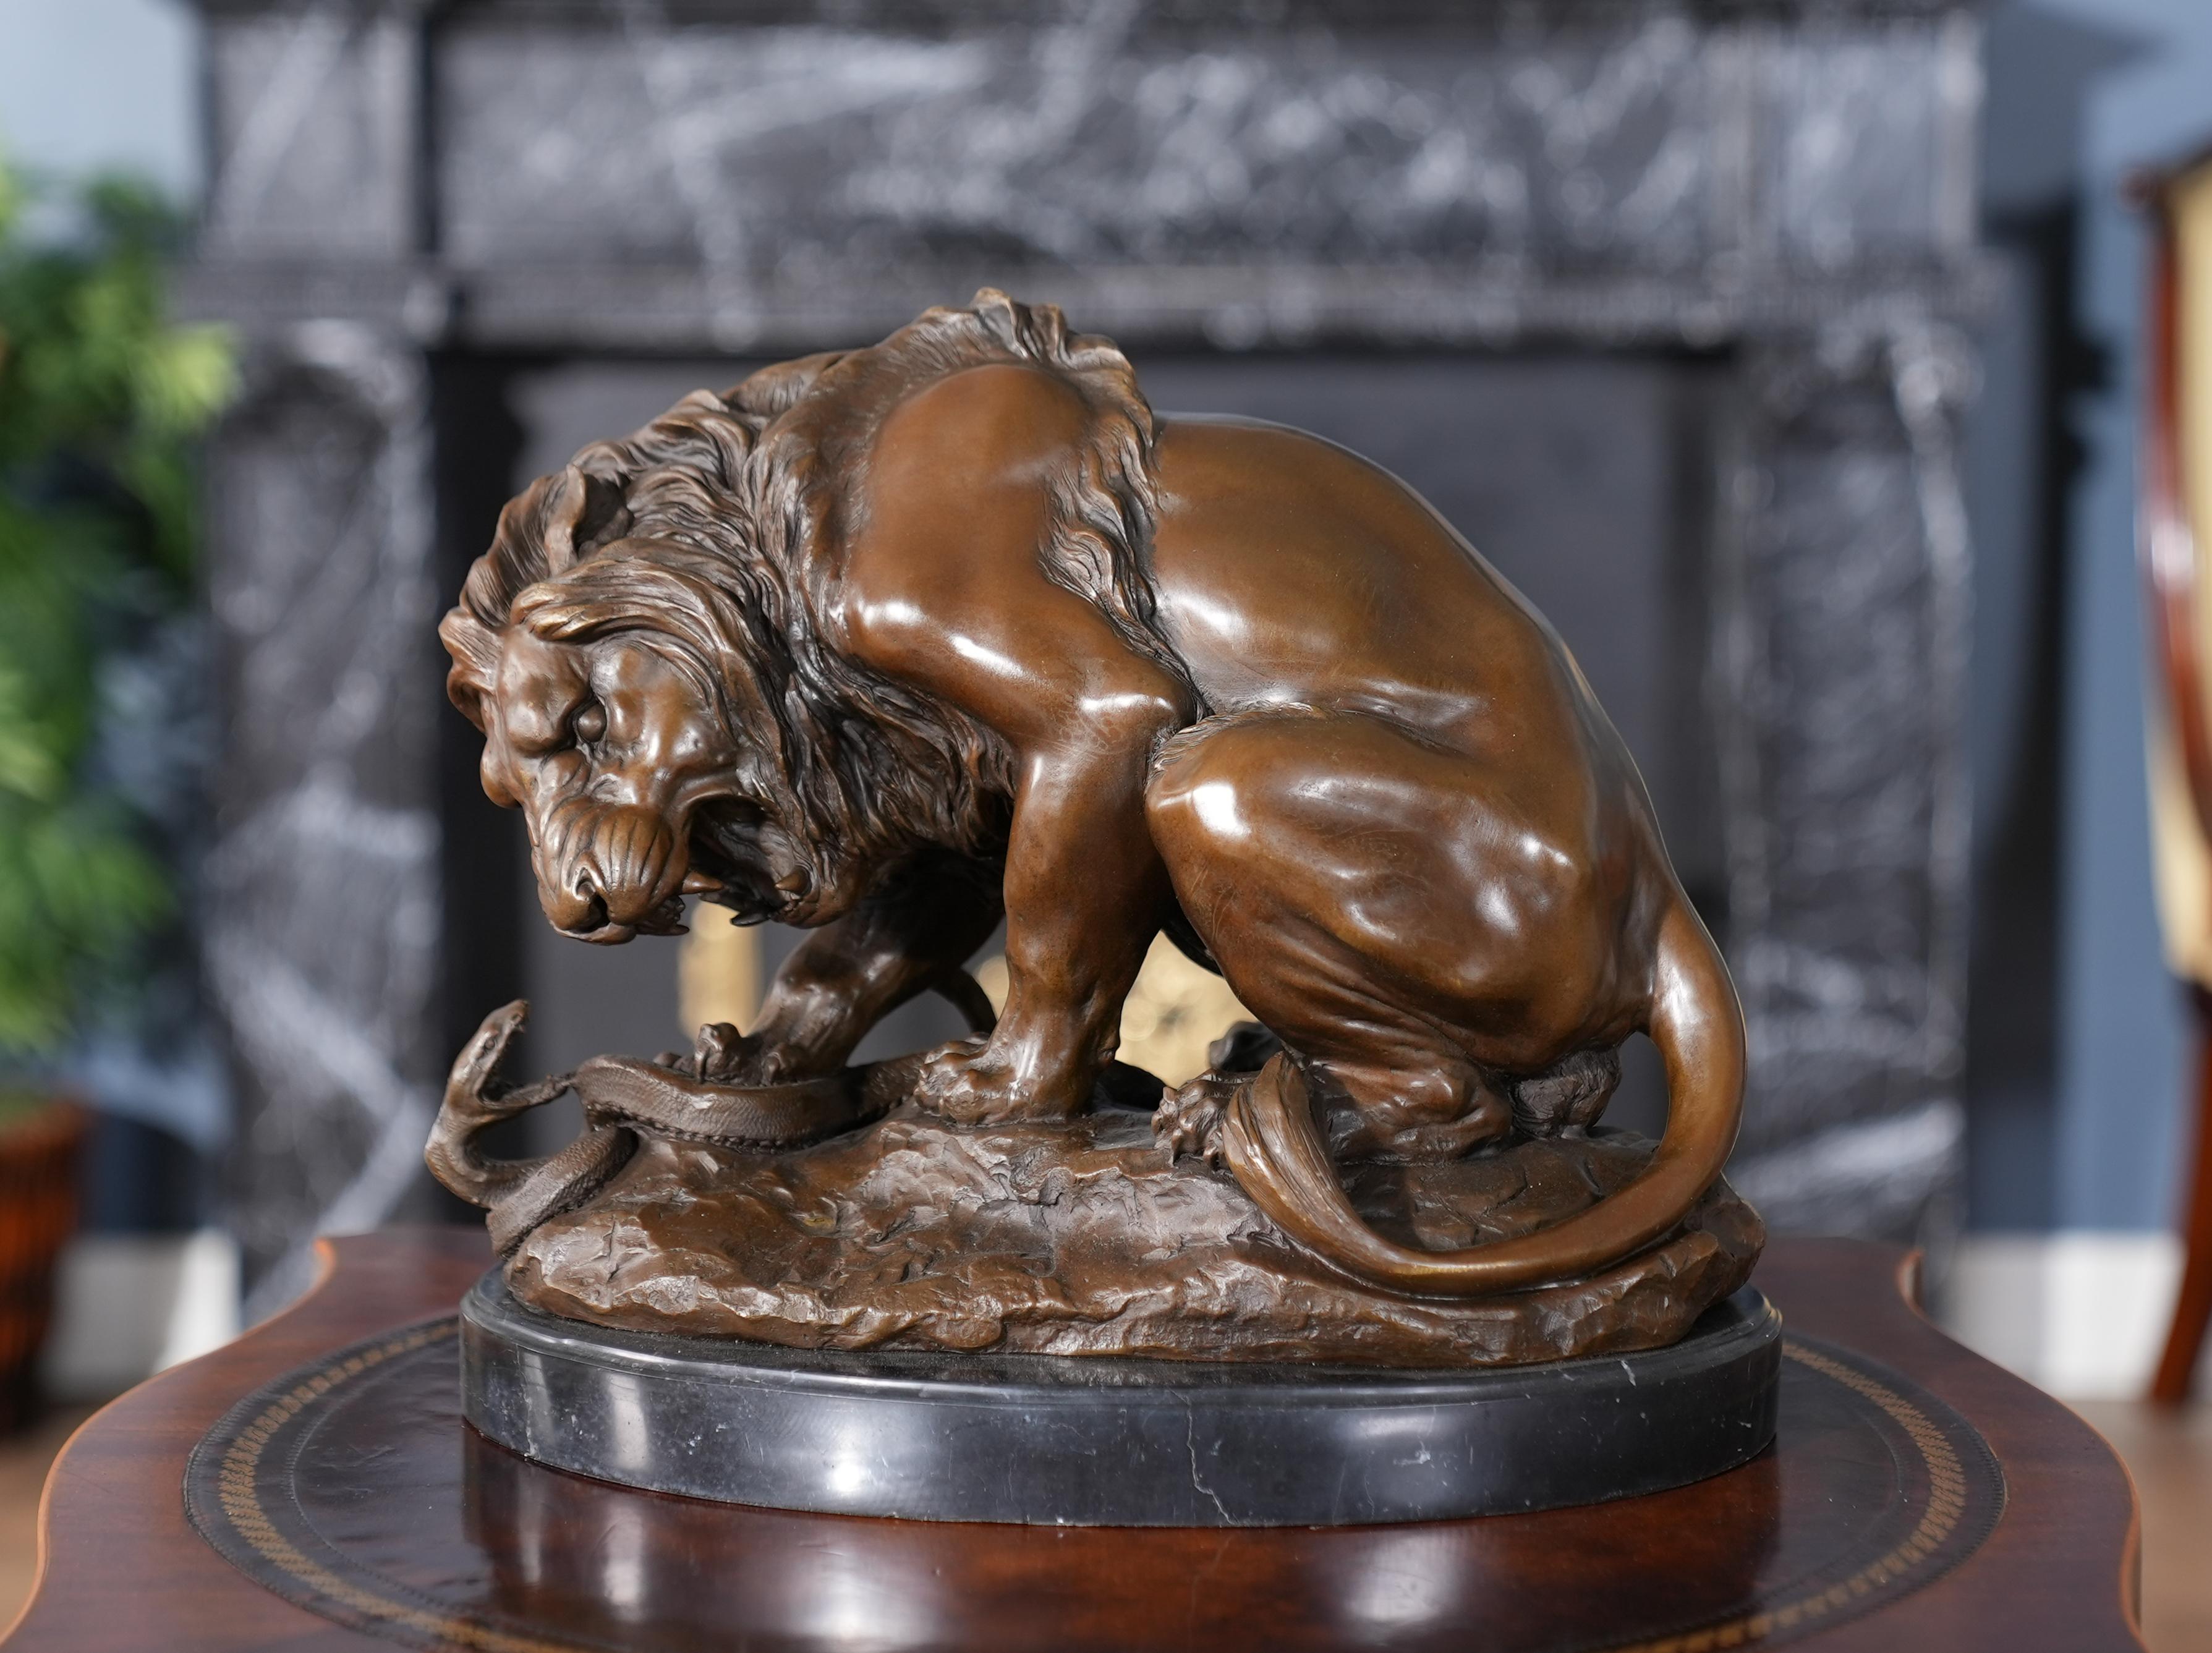 Graceful even when standing still the Bronze Lion and Snake on Marble Base is a striking addition to any setting. Using traditional lost wax casting methods the Bronze lion and Snake statue is created in pieces and then joined together with brazing